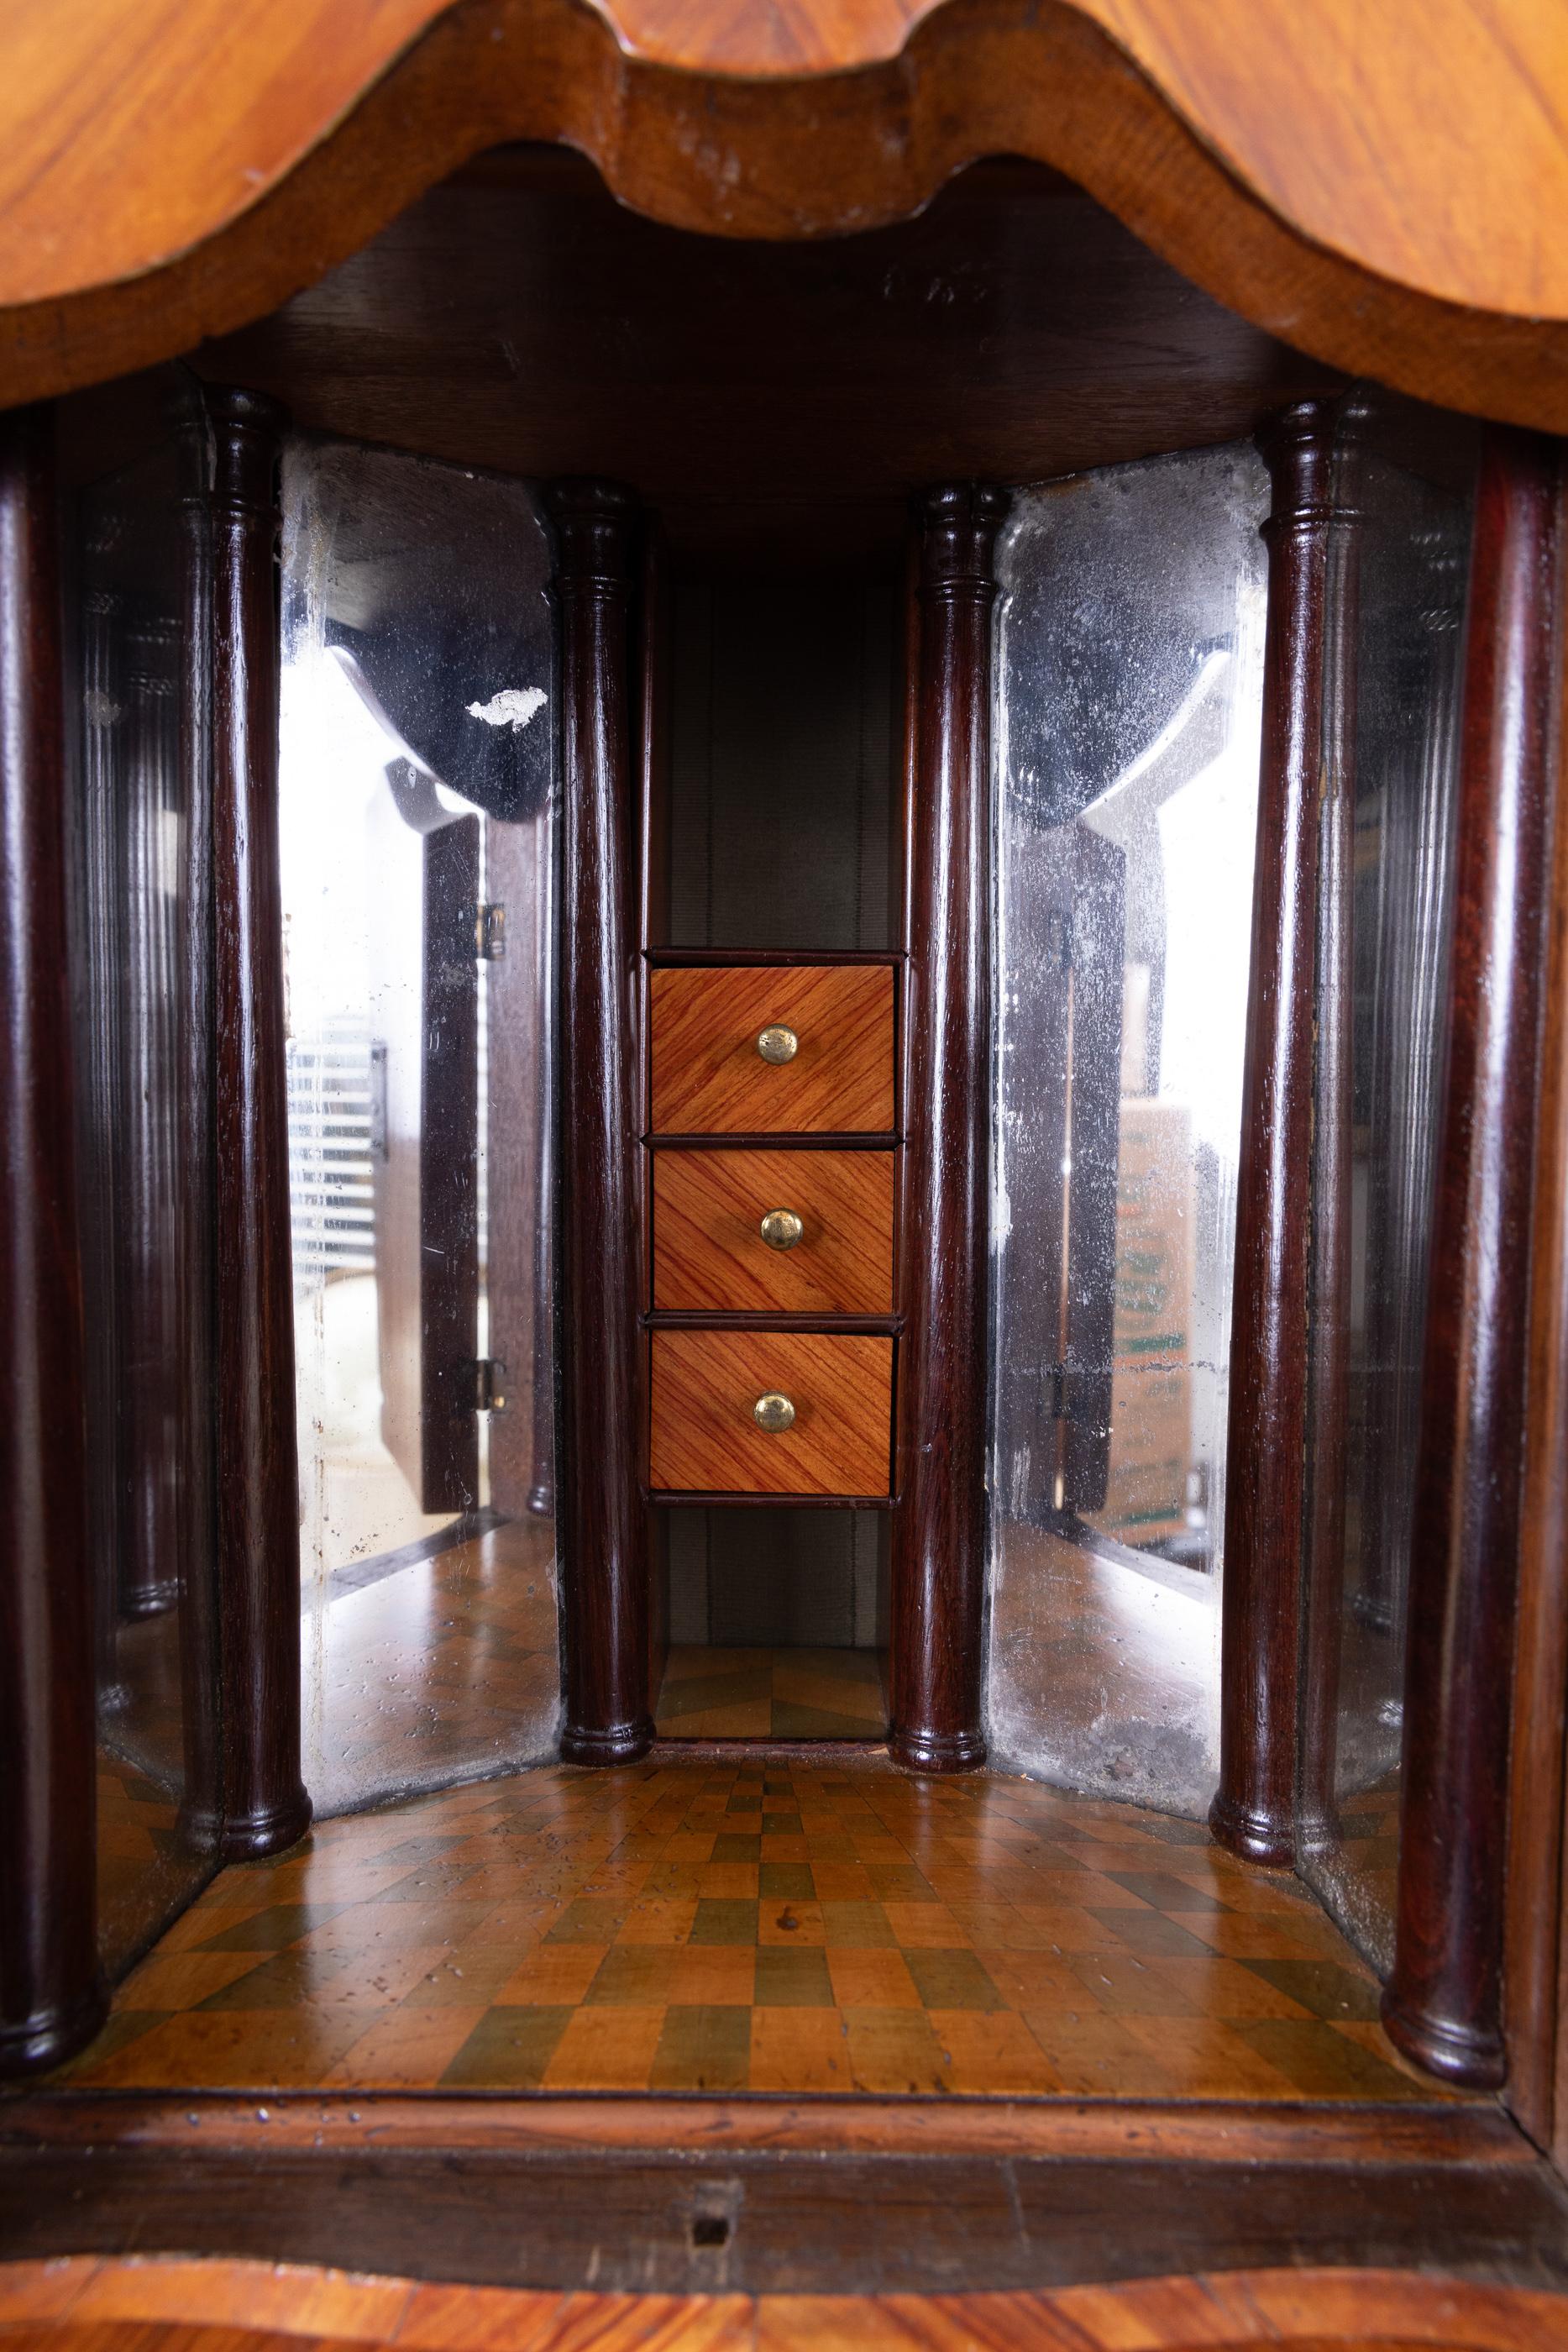 French 18th century Louis XV Bombe` heavily veneered secretaire, with glass doors at top, and secret door with checkerboard floor in small compartment, with mirrored walls to give the illusion of being larger, and deeper. The secretaire has a Bombe`